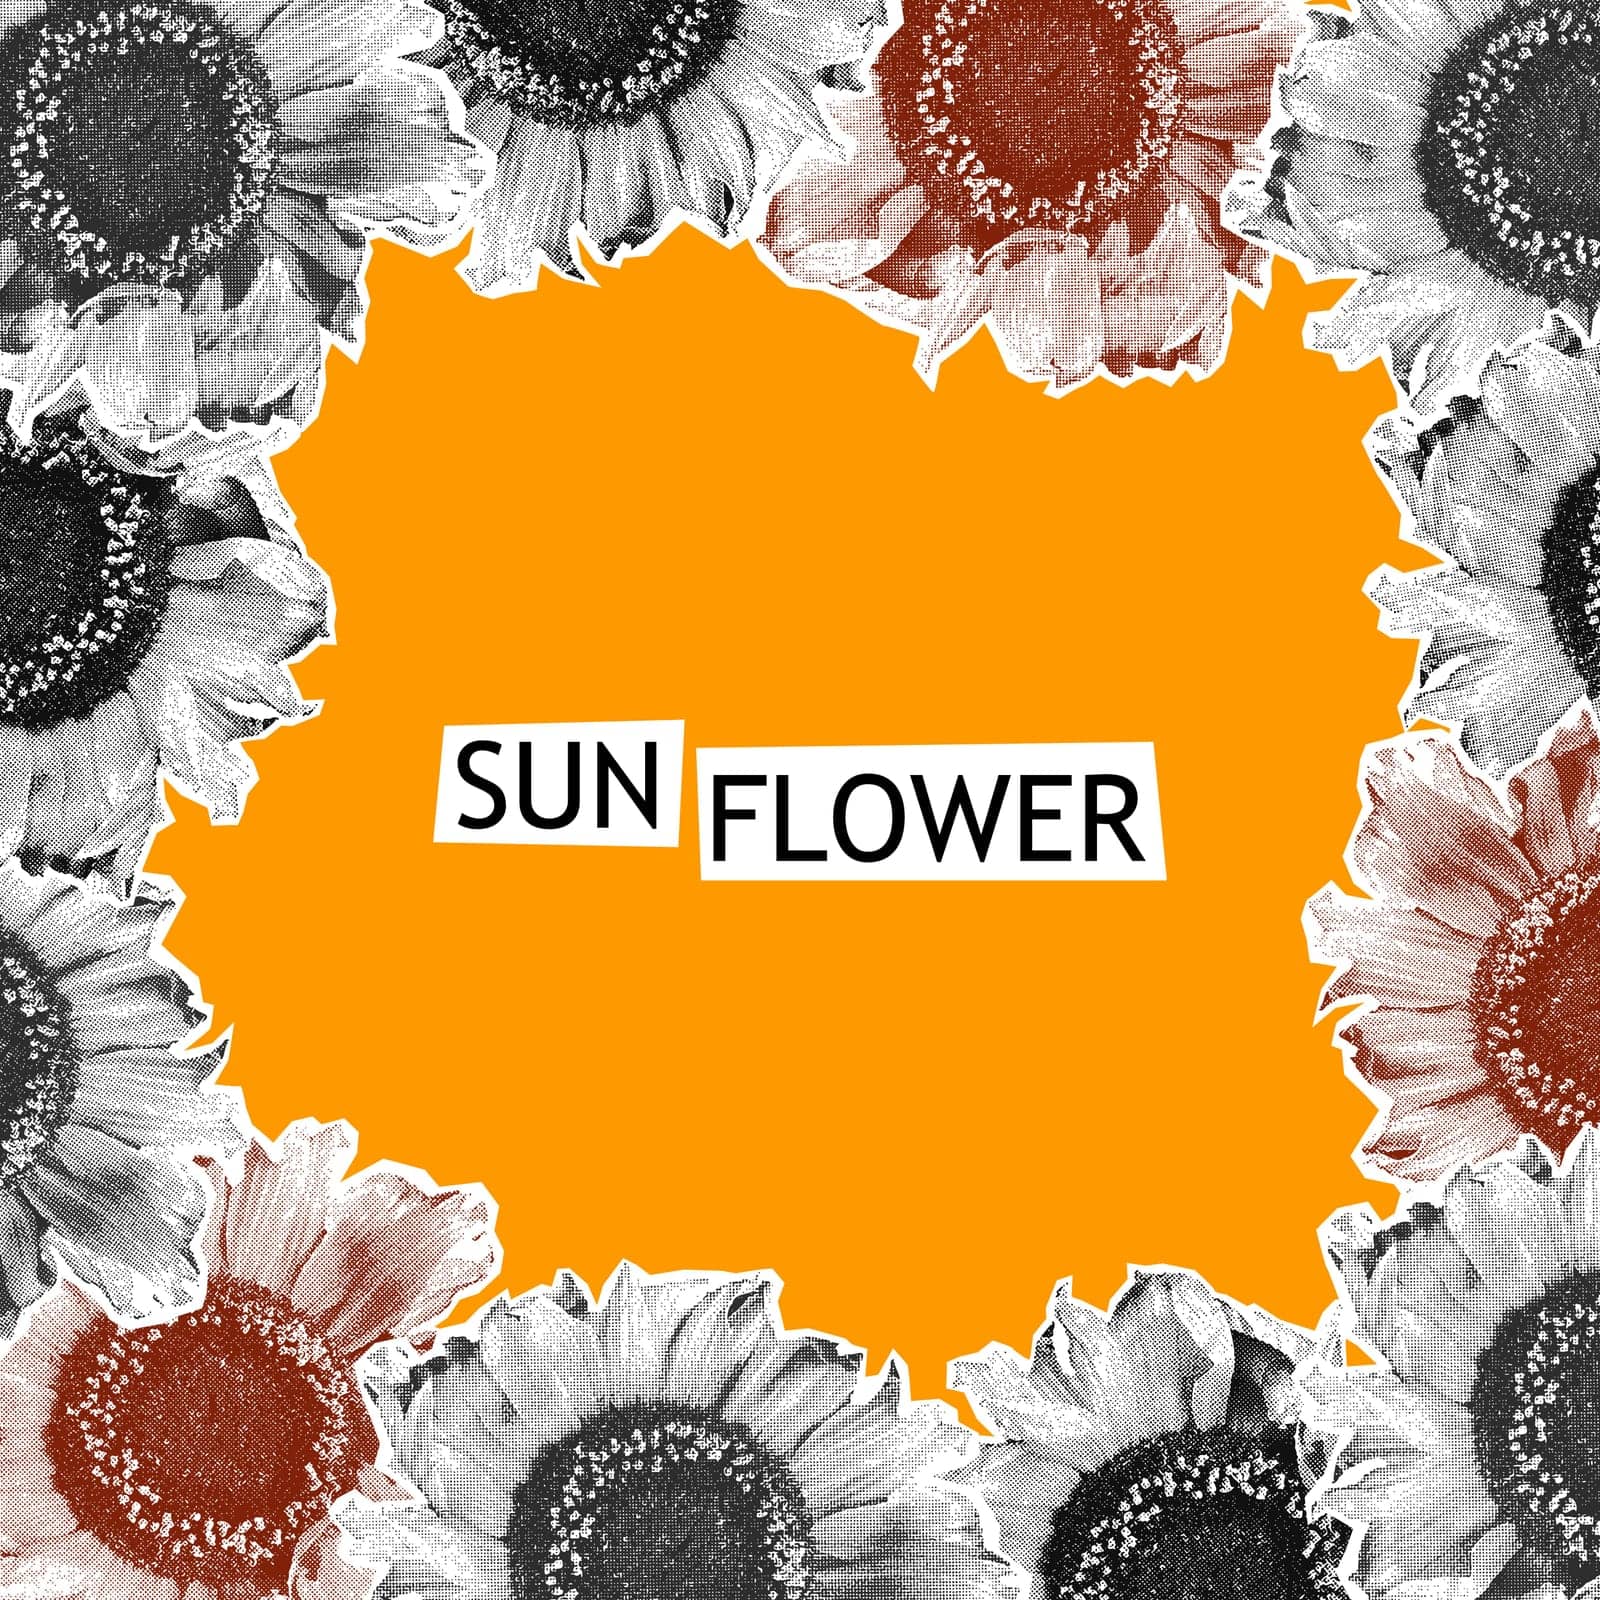 Sunflowers halftone collage poster template with dotted flowers. Square frame, border, background with copy space. Modern pop art mixed media design. Trendy vector illustration